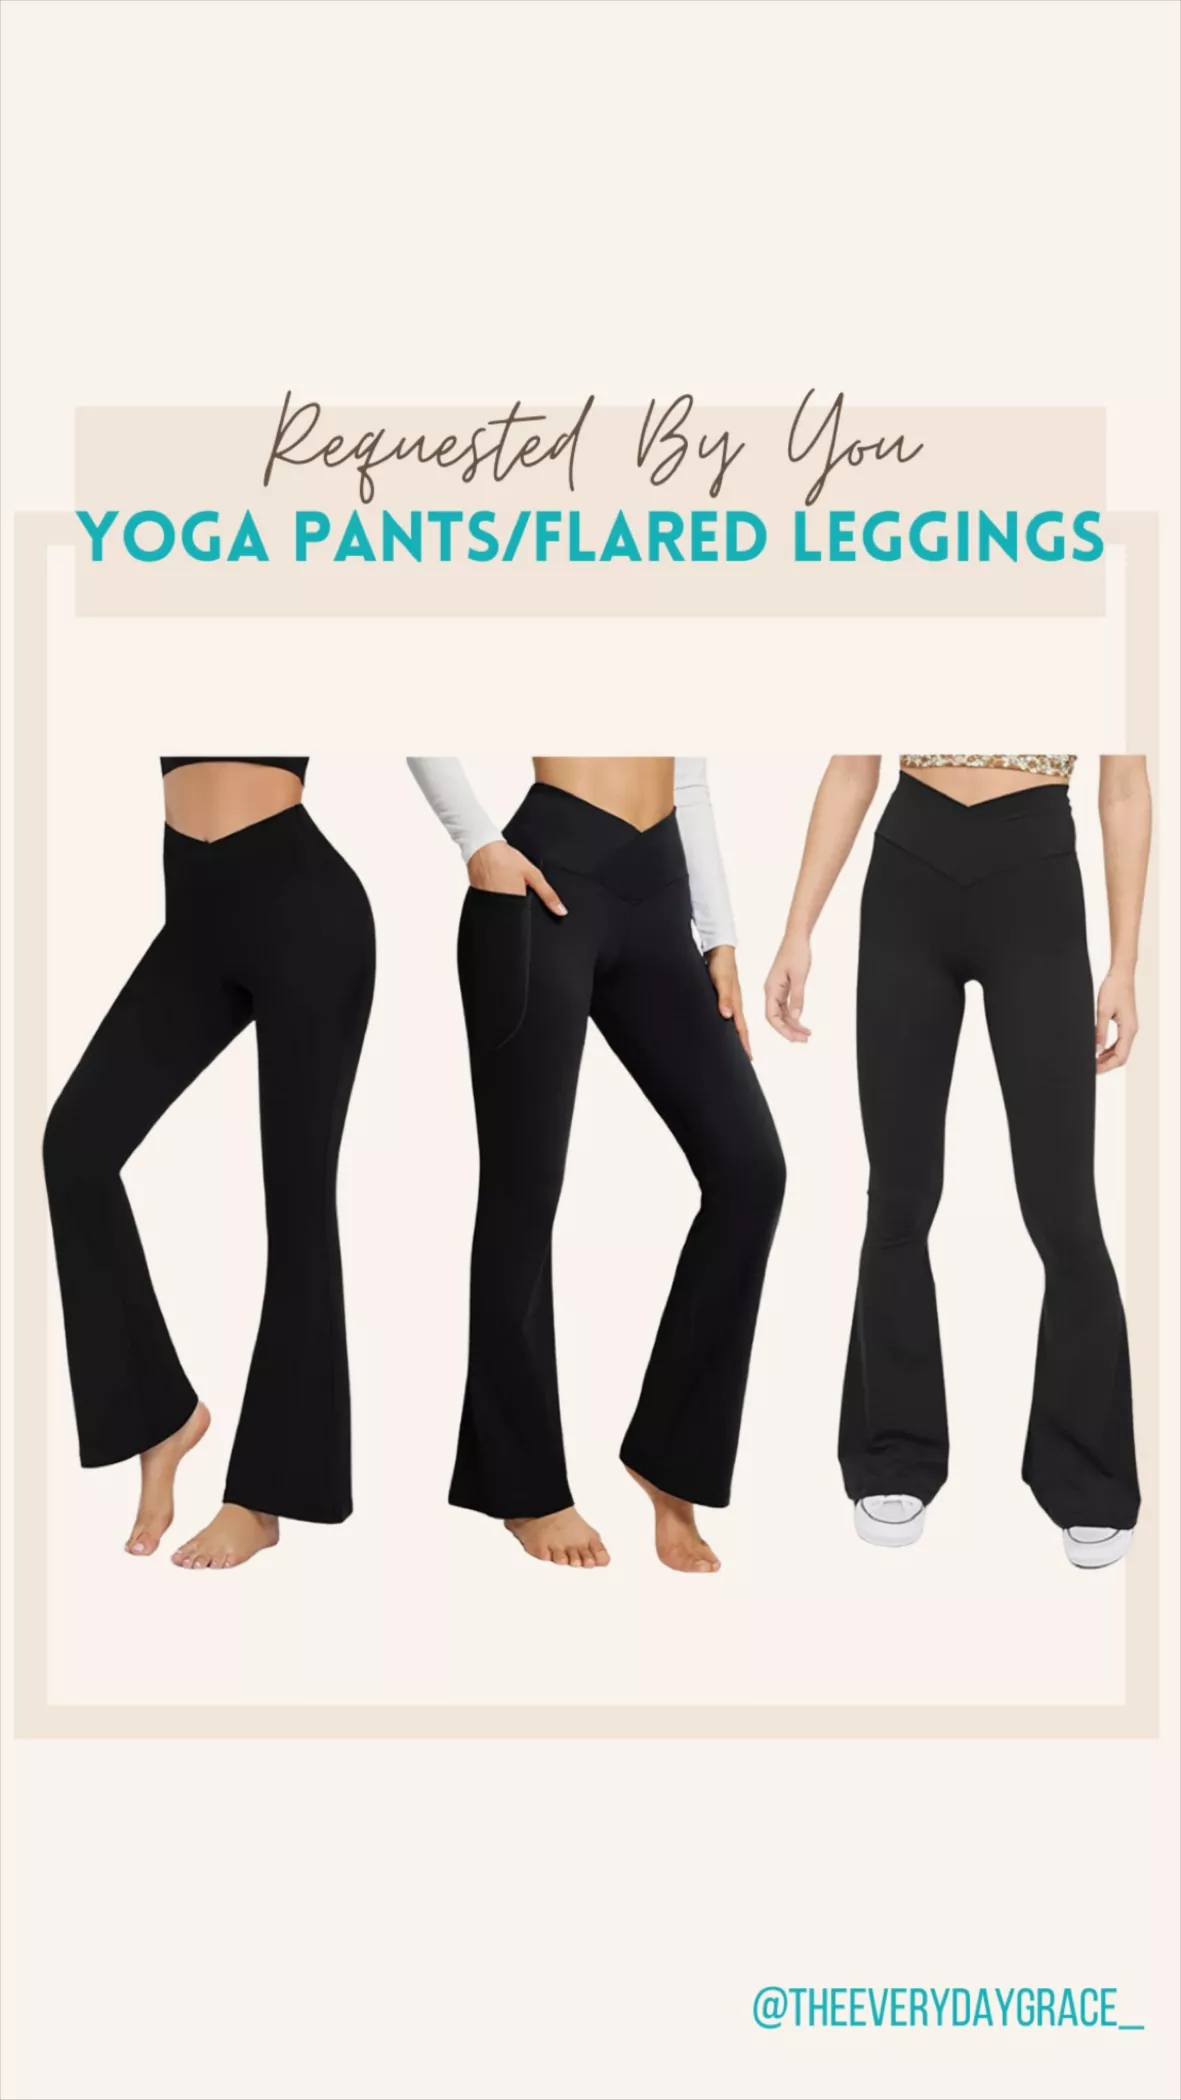 BALEAF Yoga Workout Capris for Women Lounge Flare Pants Casual